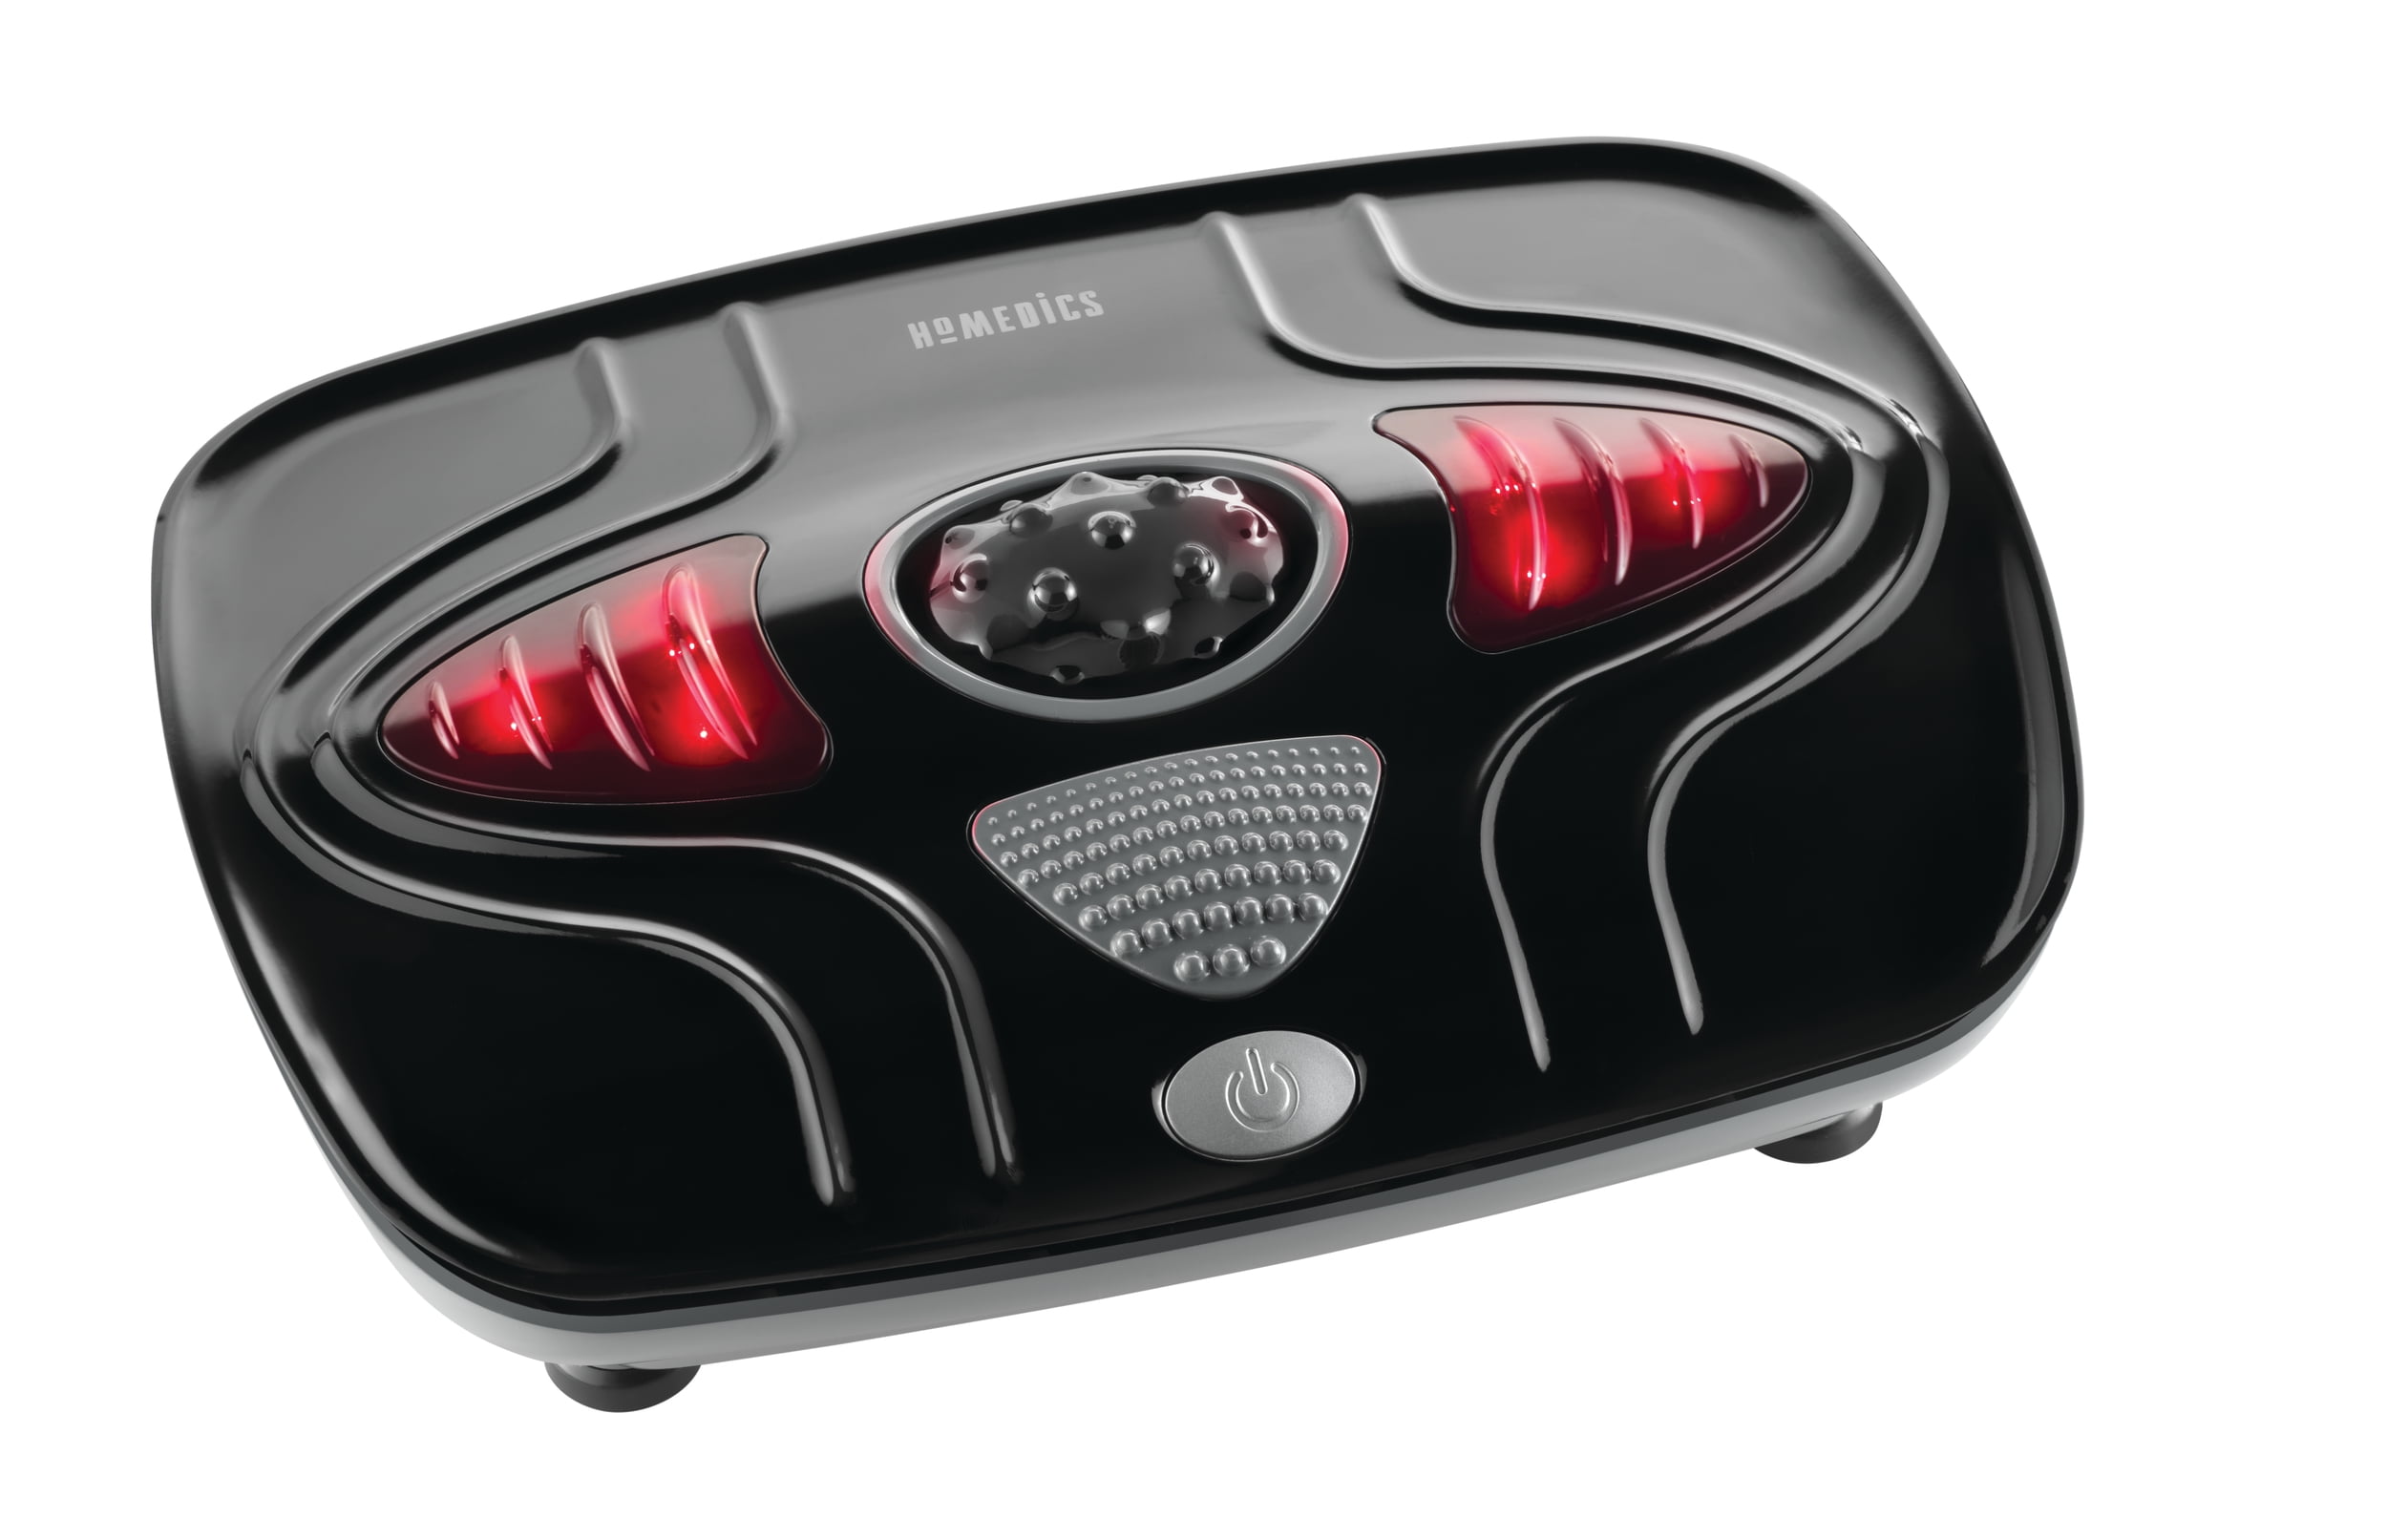 Homedics MaxCOMFORT Shiatsu Foot Massager, Rotating Shiatsu Massage Nodes with Soothing Heat to Relax Muscles and Relieve Pain - 1 Each